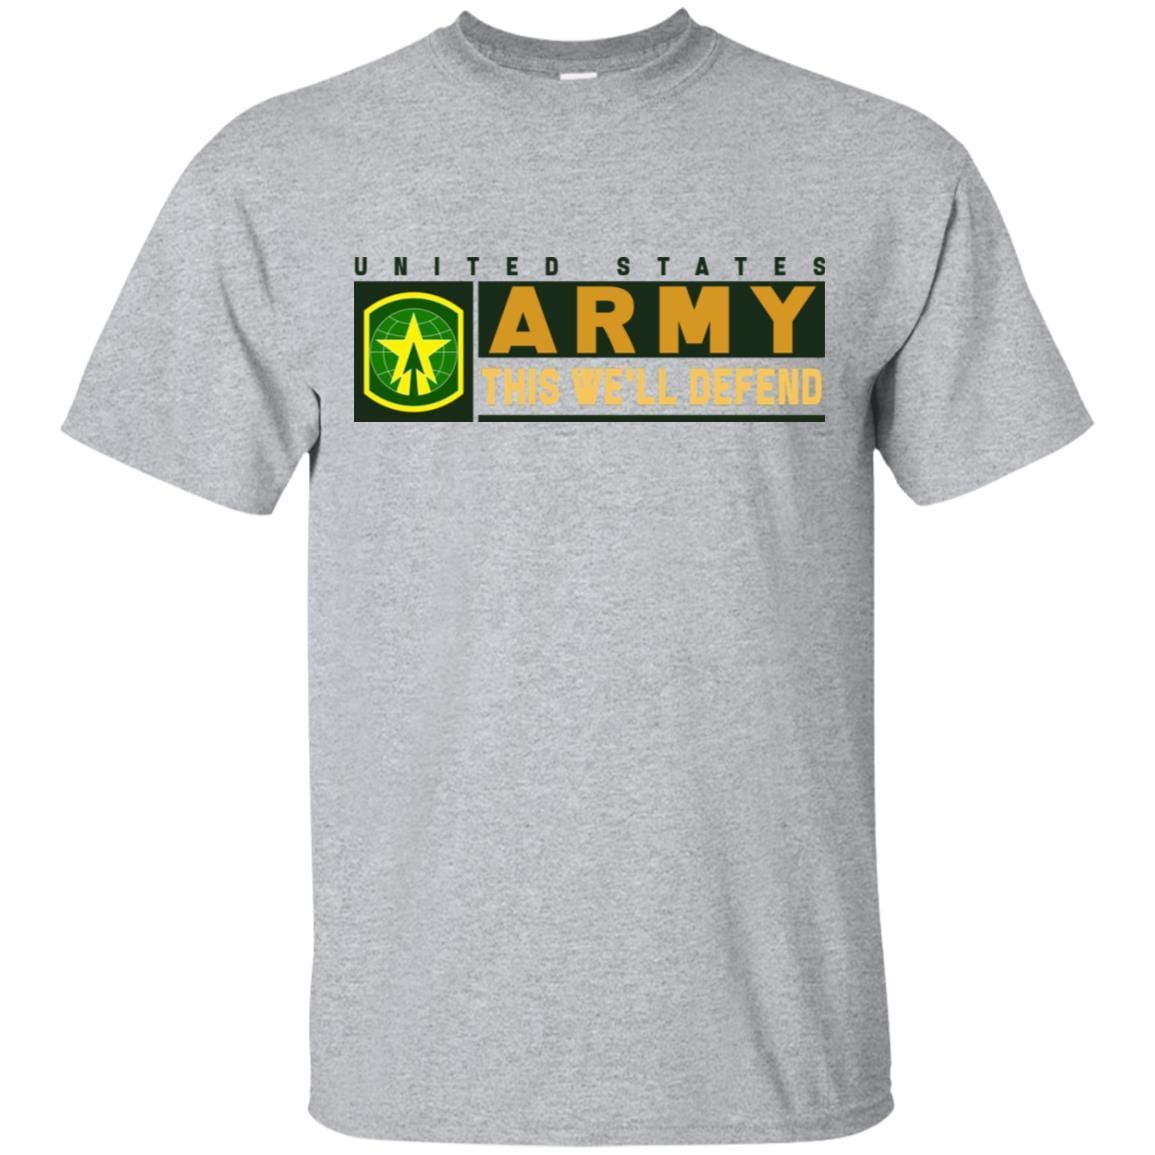 US Army 16TH MILITARY POLICE BRIGADE- This We'll Defend T-Shirt On Front For Men-TShirt-Army-Veterans Nation